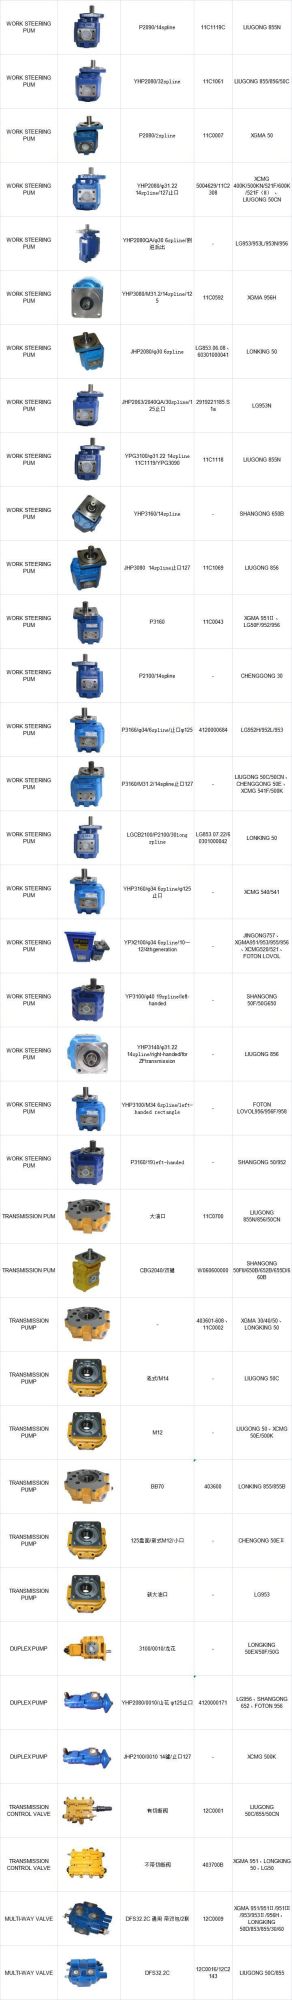 Cheap Price New Hydraulic Pump for Excavator with CE Certificate for Wheel Loader